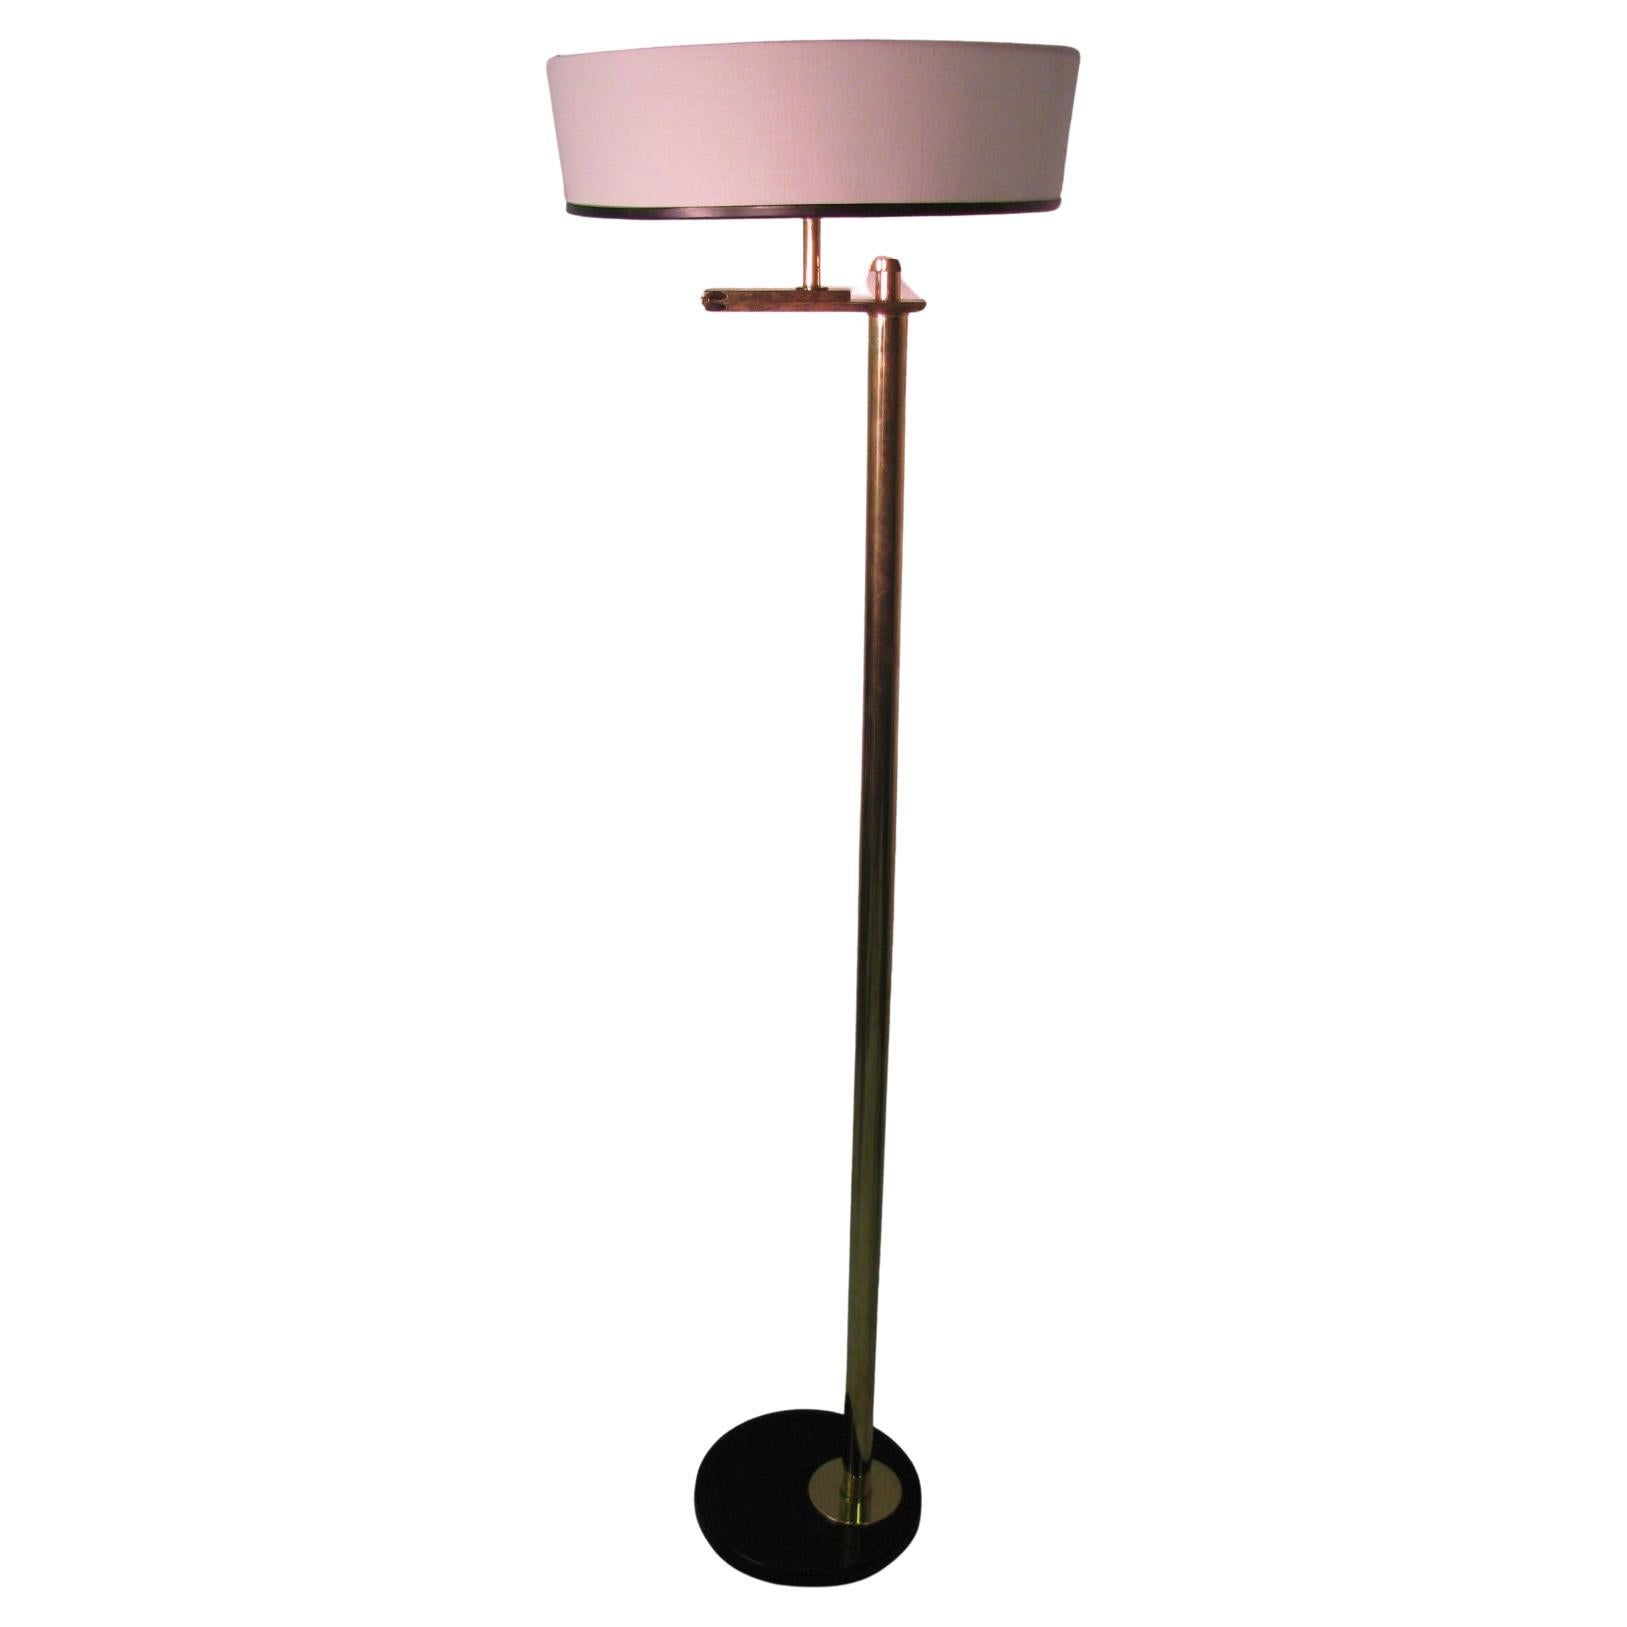 Painted Art Deco Mid-Century Modern Reading or Torchiere Flip Lamp by Kurt Versen For Sale